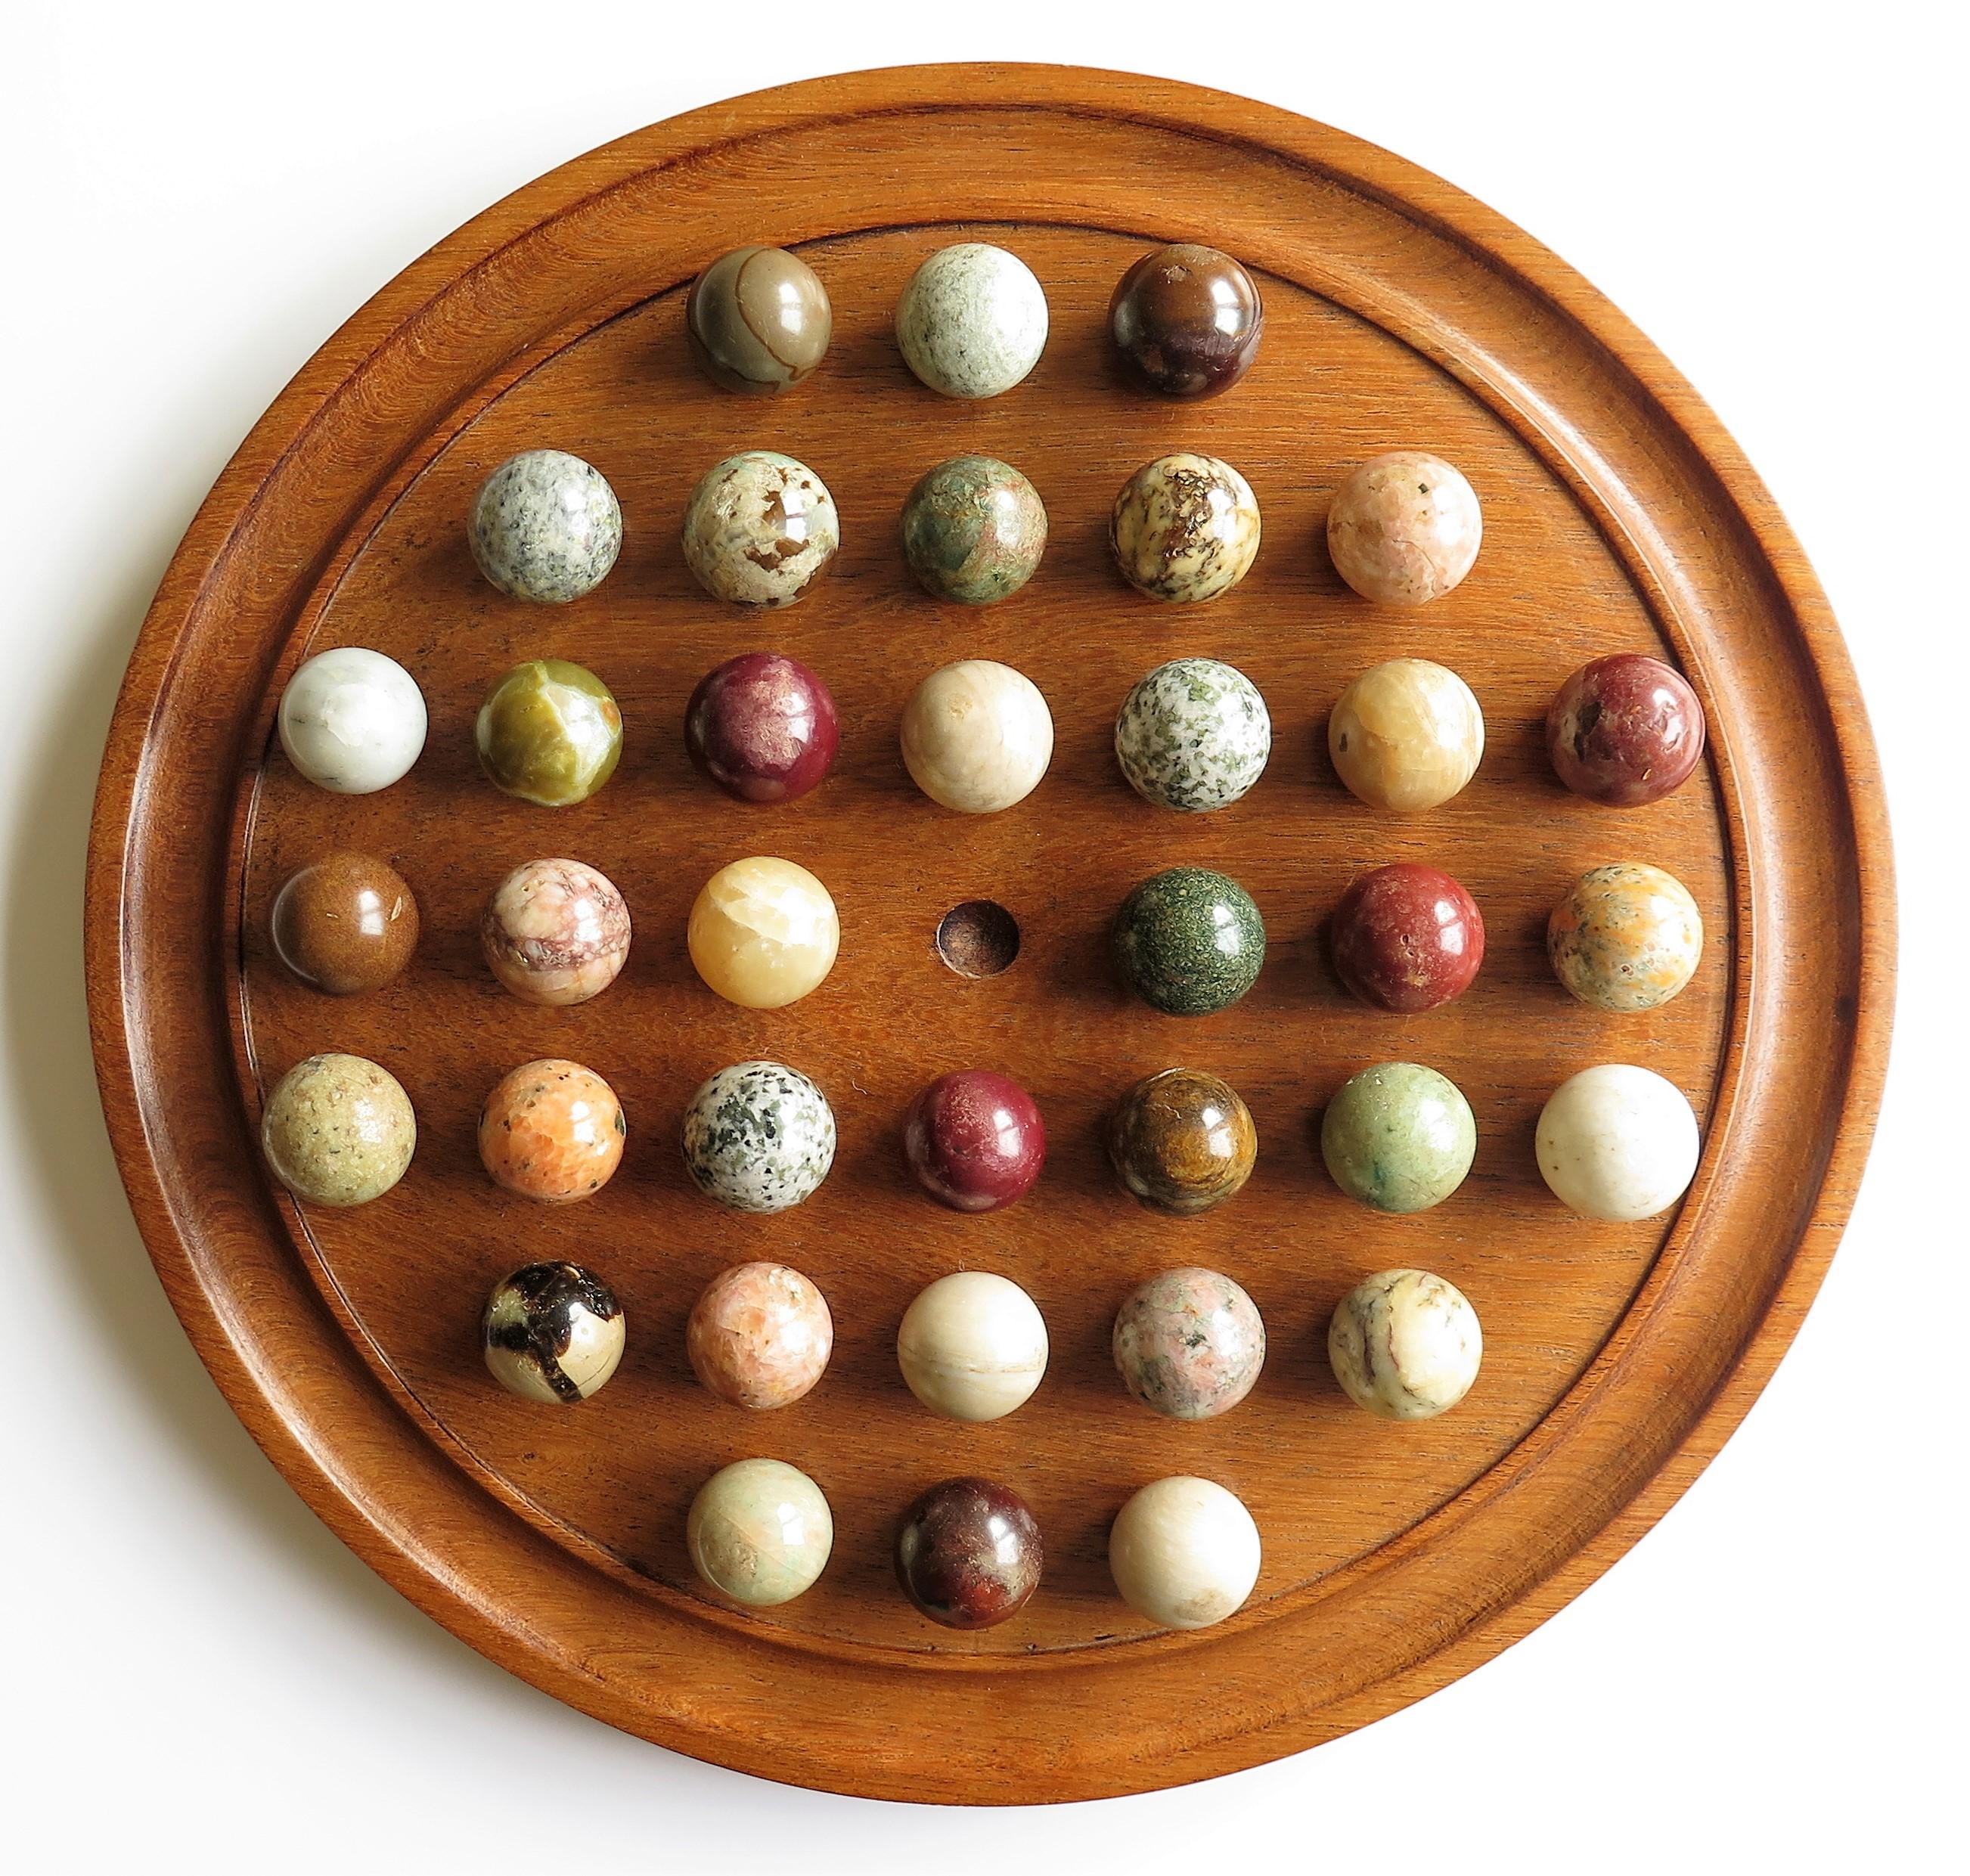 This is a very decorative and complete board game of 37 hole marble solitaire with a very large 14.5 inch diameter hardwood board and 36 beautiful individual agate stone marbles, which we date to the late 19th century, probably of French